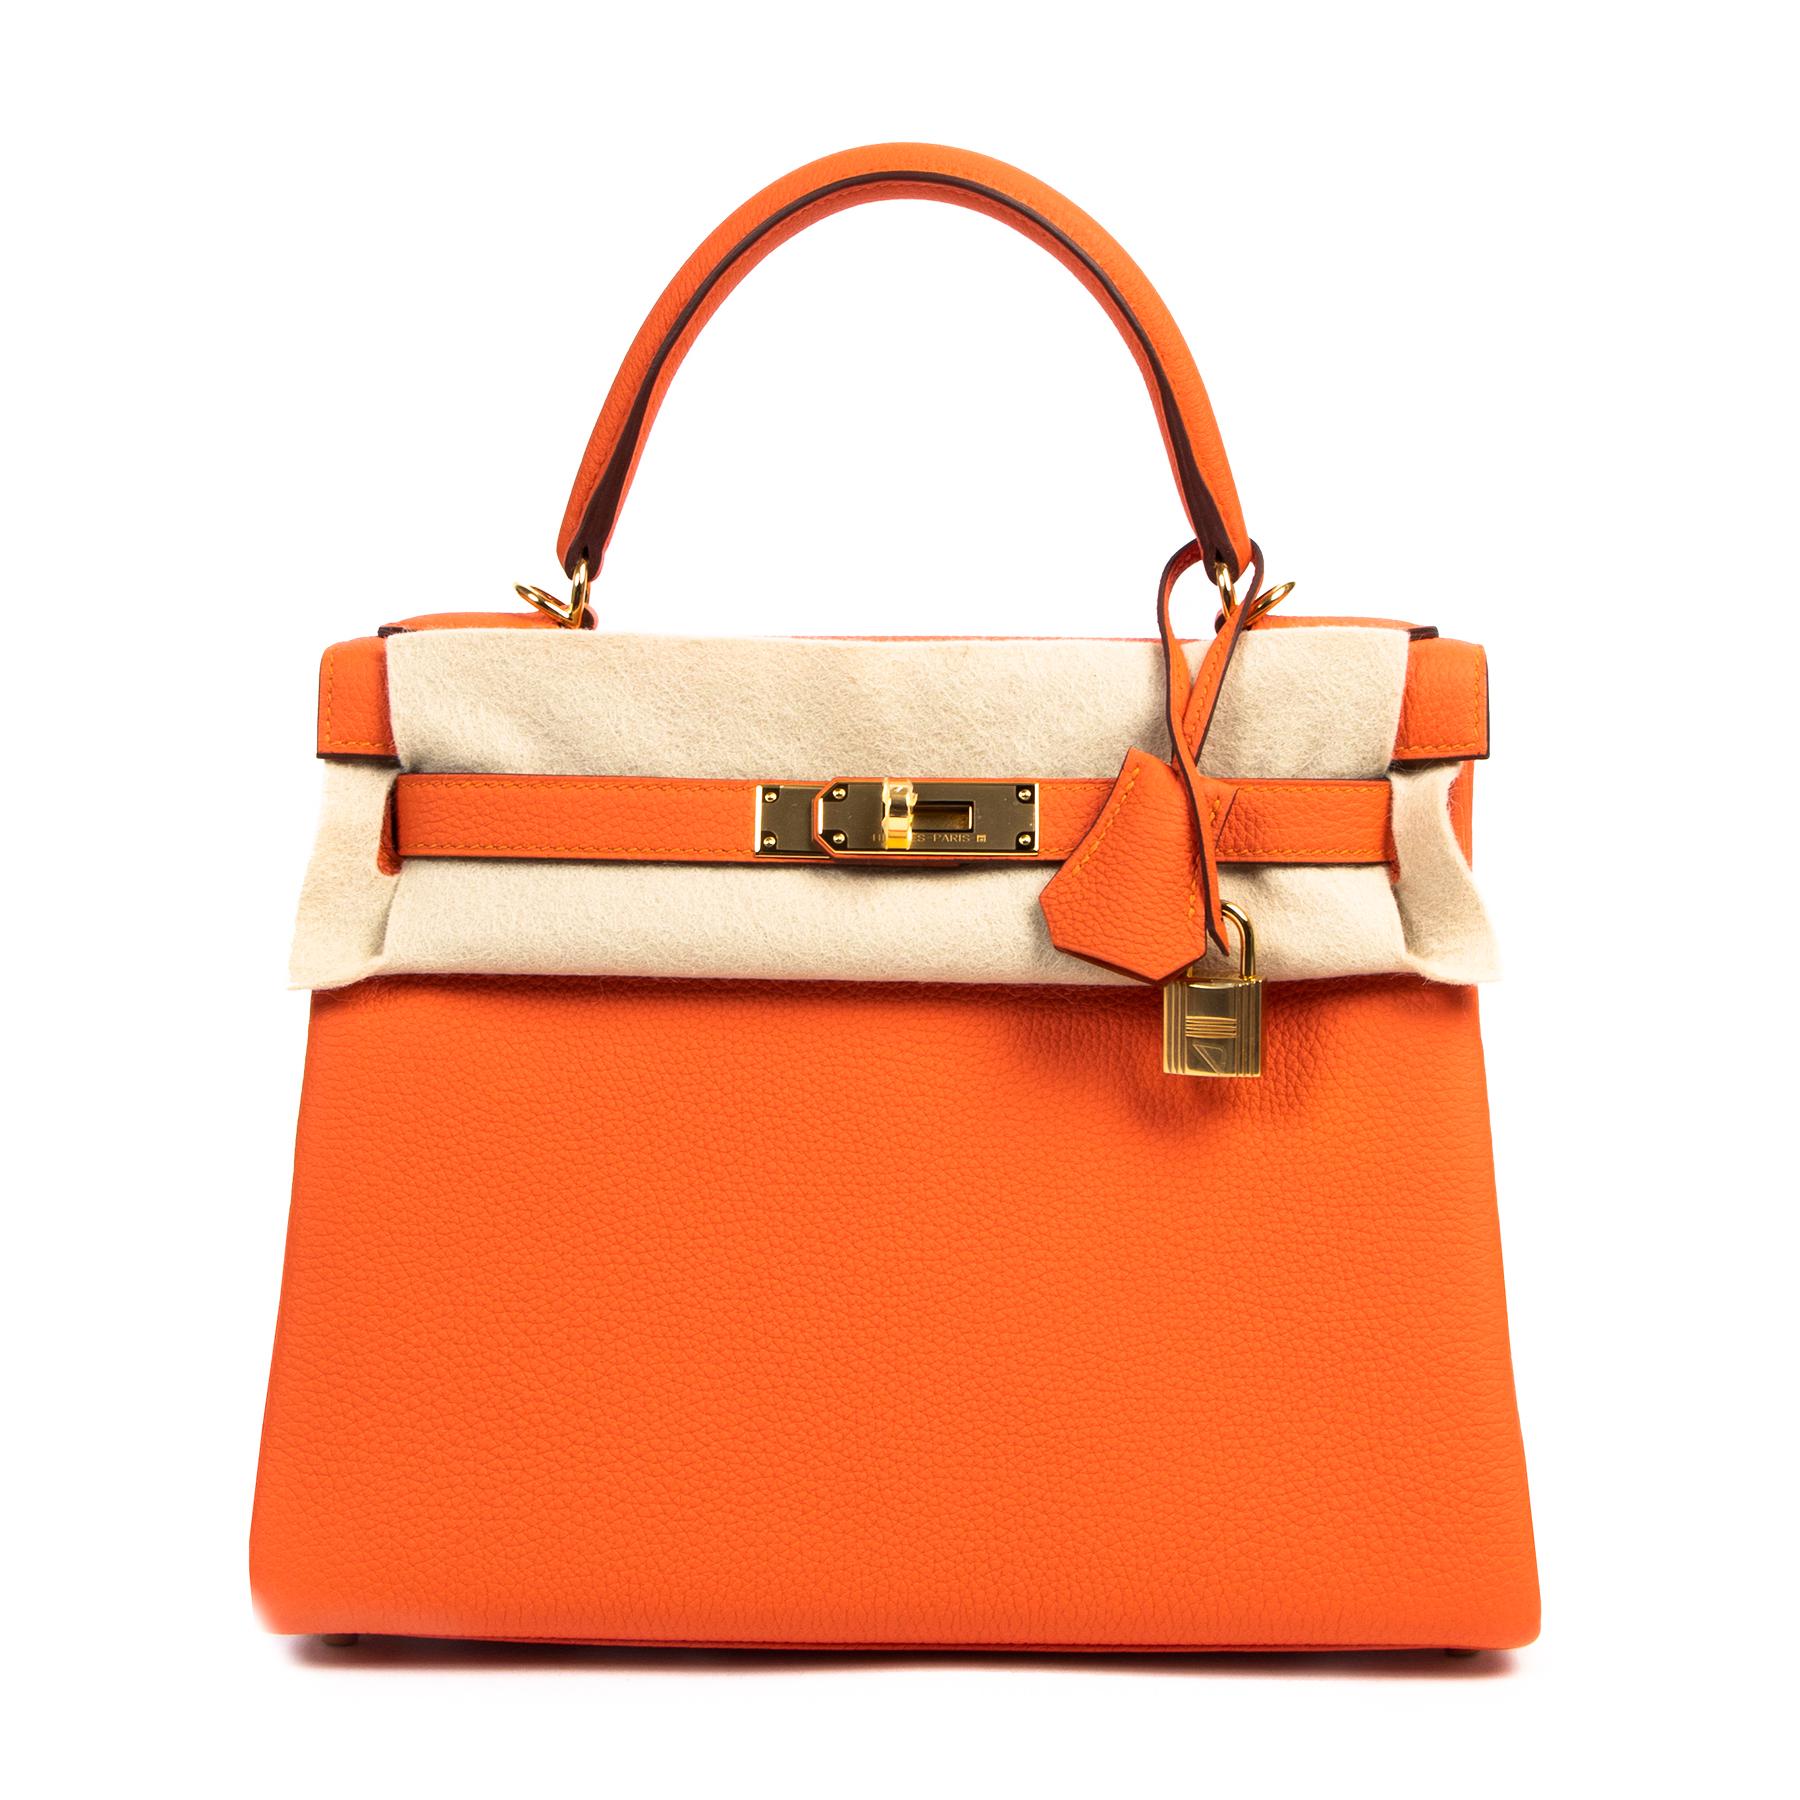 BRAND NEW

Hermès Kelly Retourne 28 Togo Feu GHW

The perfect bag for the woman who knows her classics but isn't afraid to make a statement: this brand new and store-fresh Hermès Kelly Retourne 28 Togo Feu GHW has everything you've ever looked for